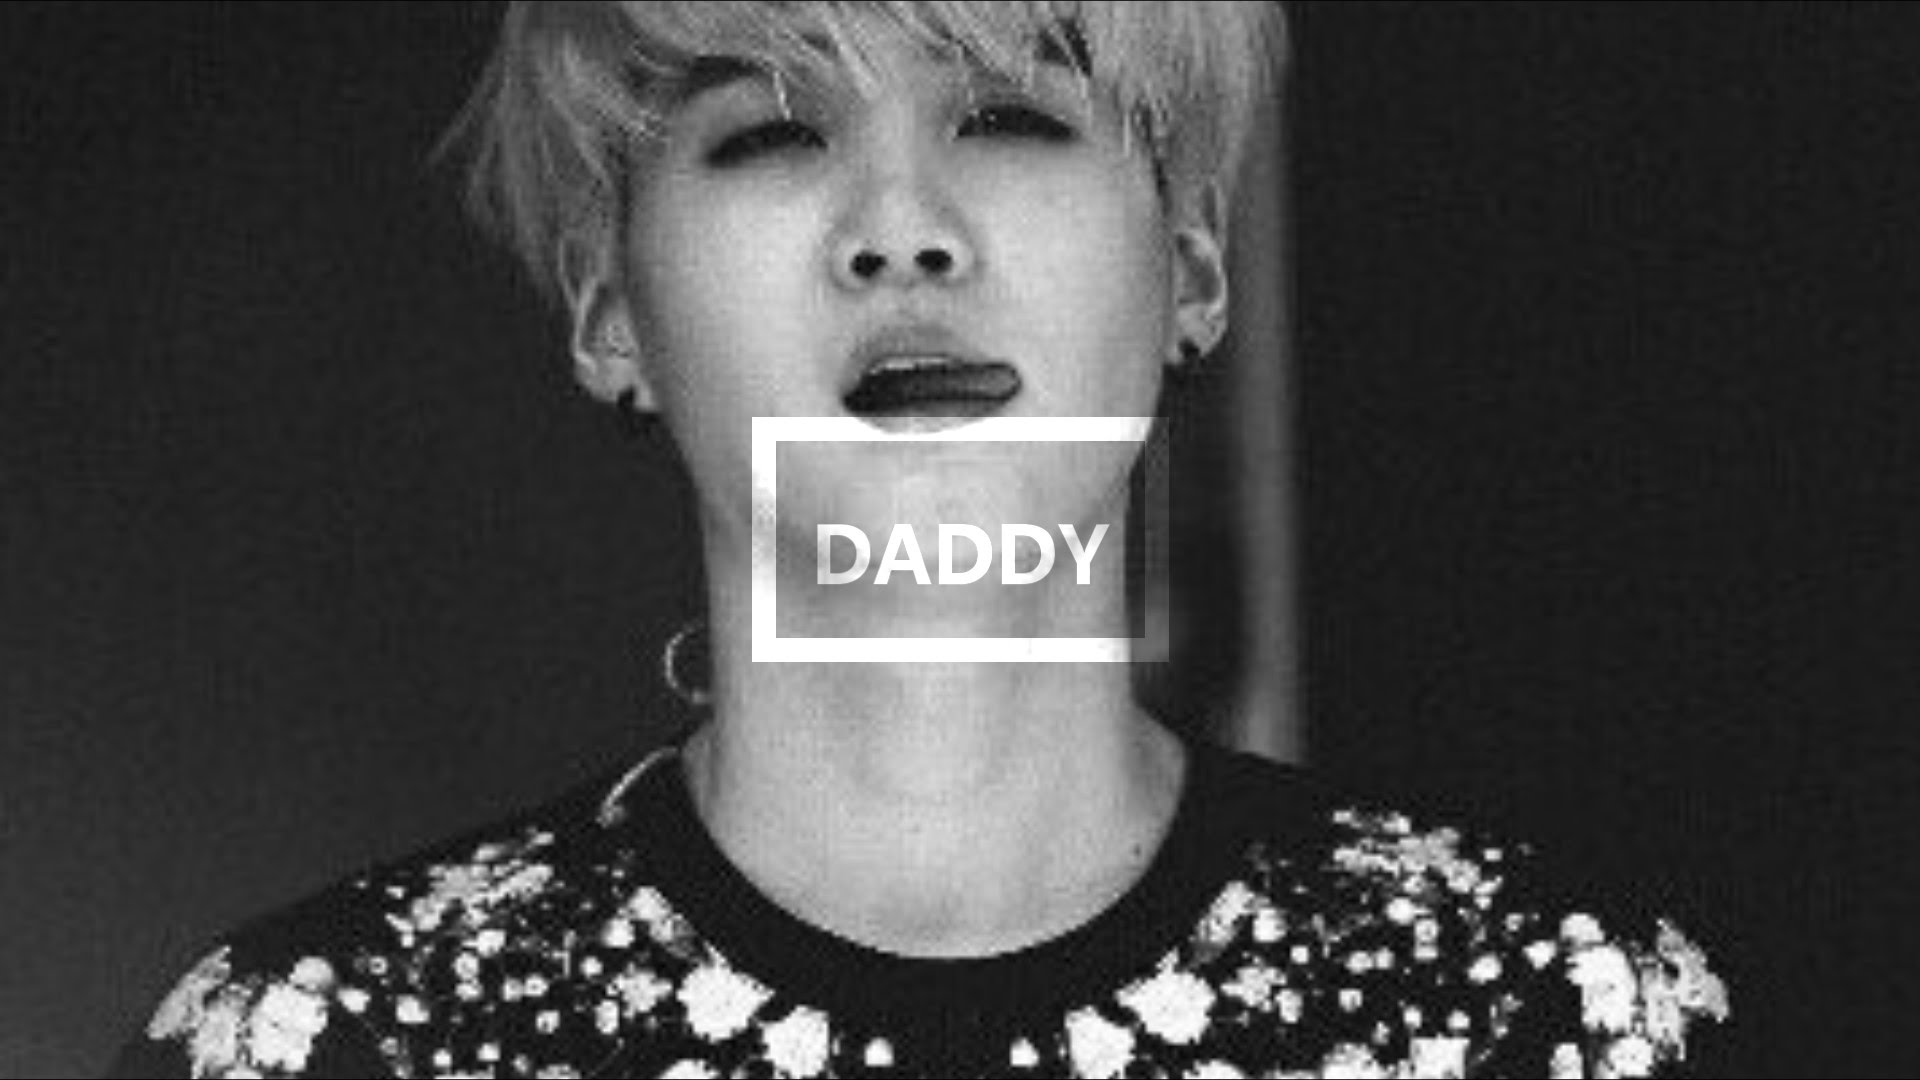 Suga Daddy Material - Bts Suga Daddy , HD Wallpaper & Backgrounds